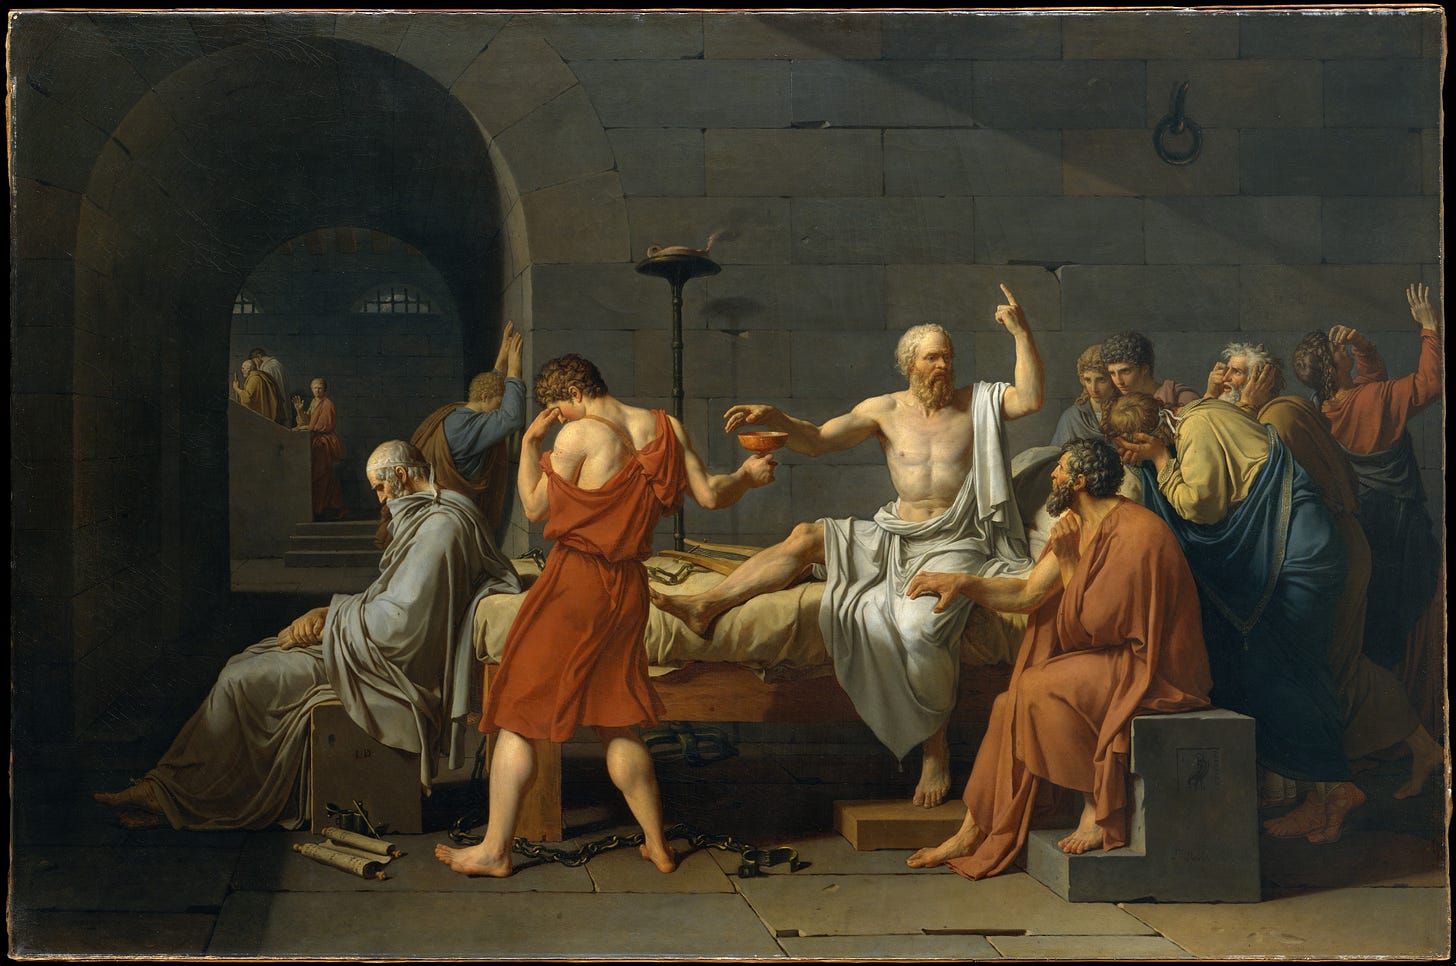 Jacques-Louis David's The Death of Socrates, showing the famous philosopher on his deathbed accepting the cup of hemlock that was his sentence.